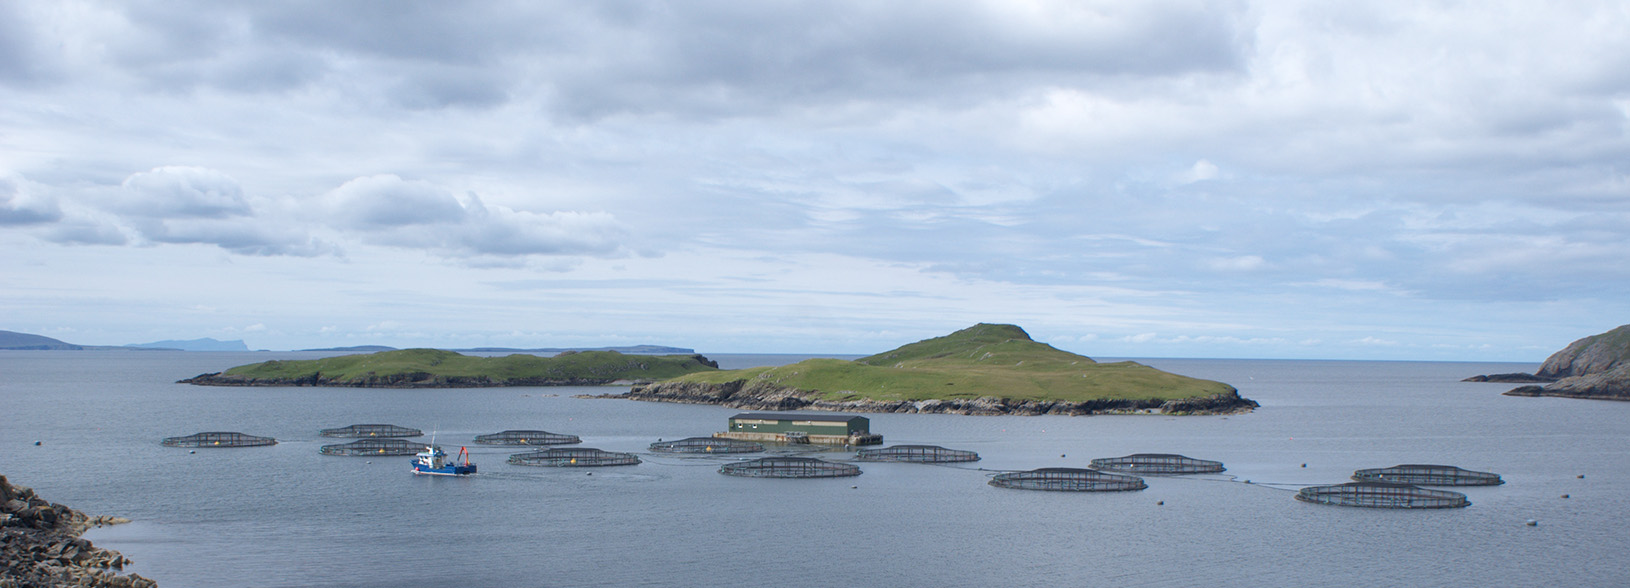 An island with salmon cages on the sea